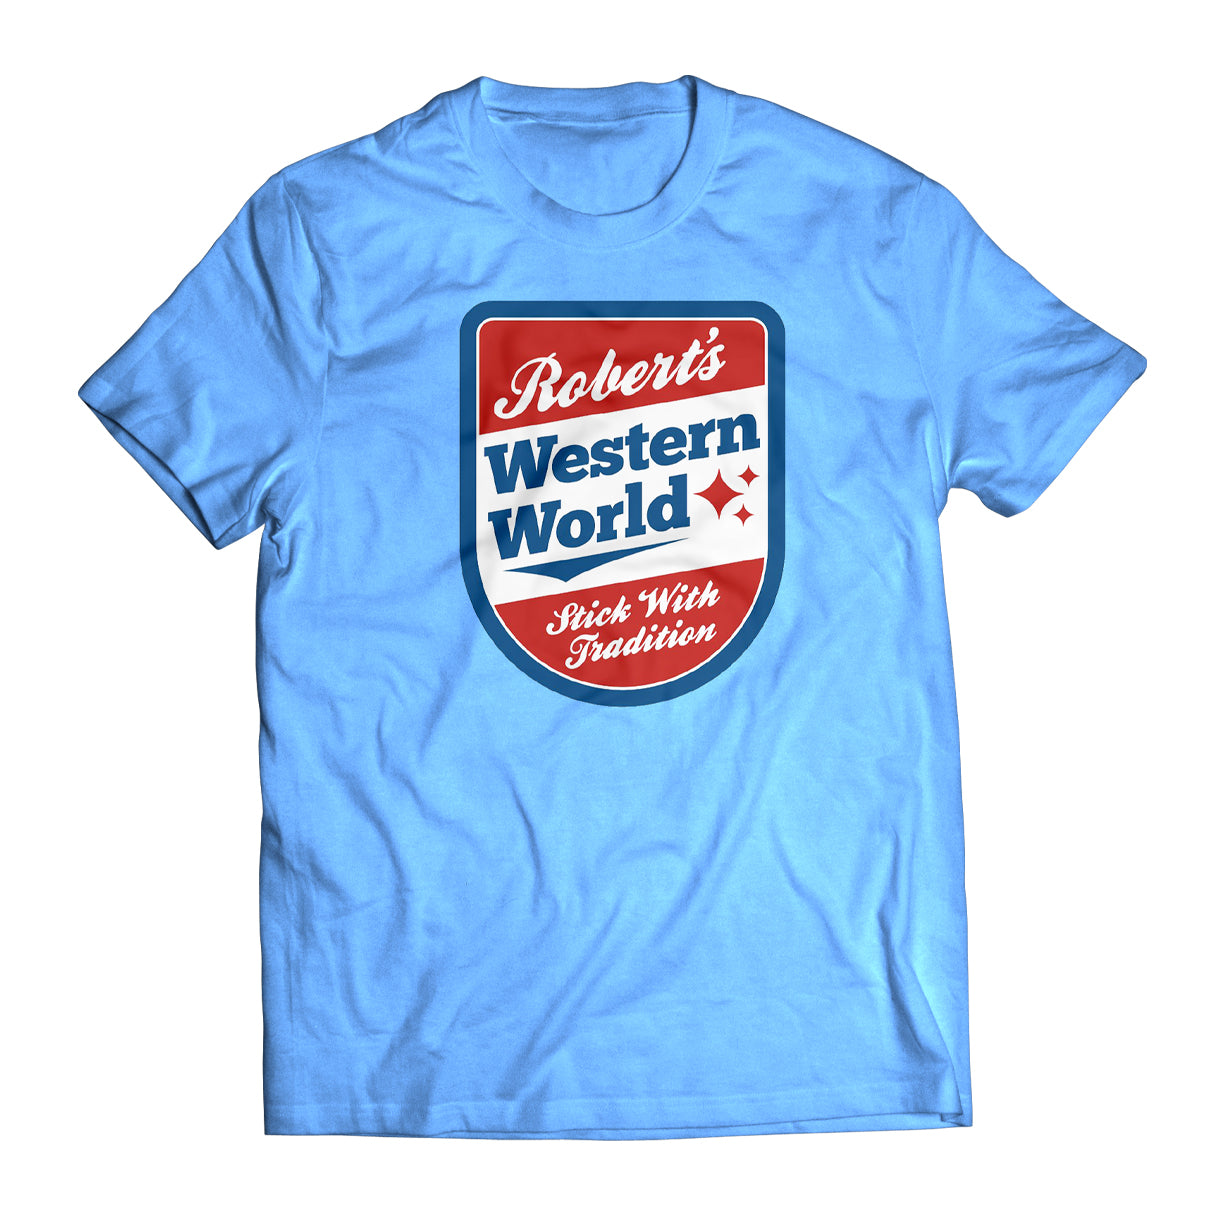 Stick With Tradition Tee - Baby Blue